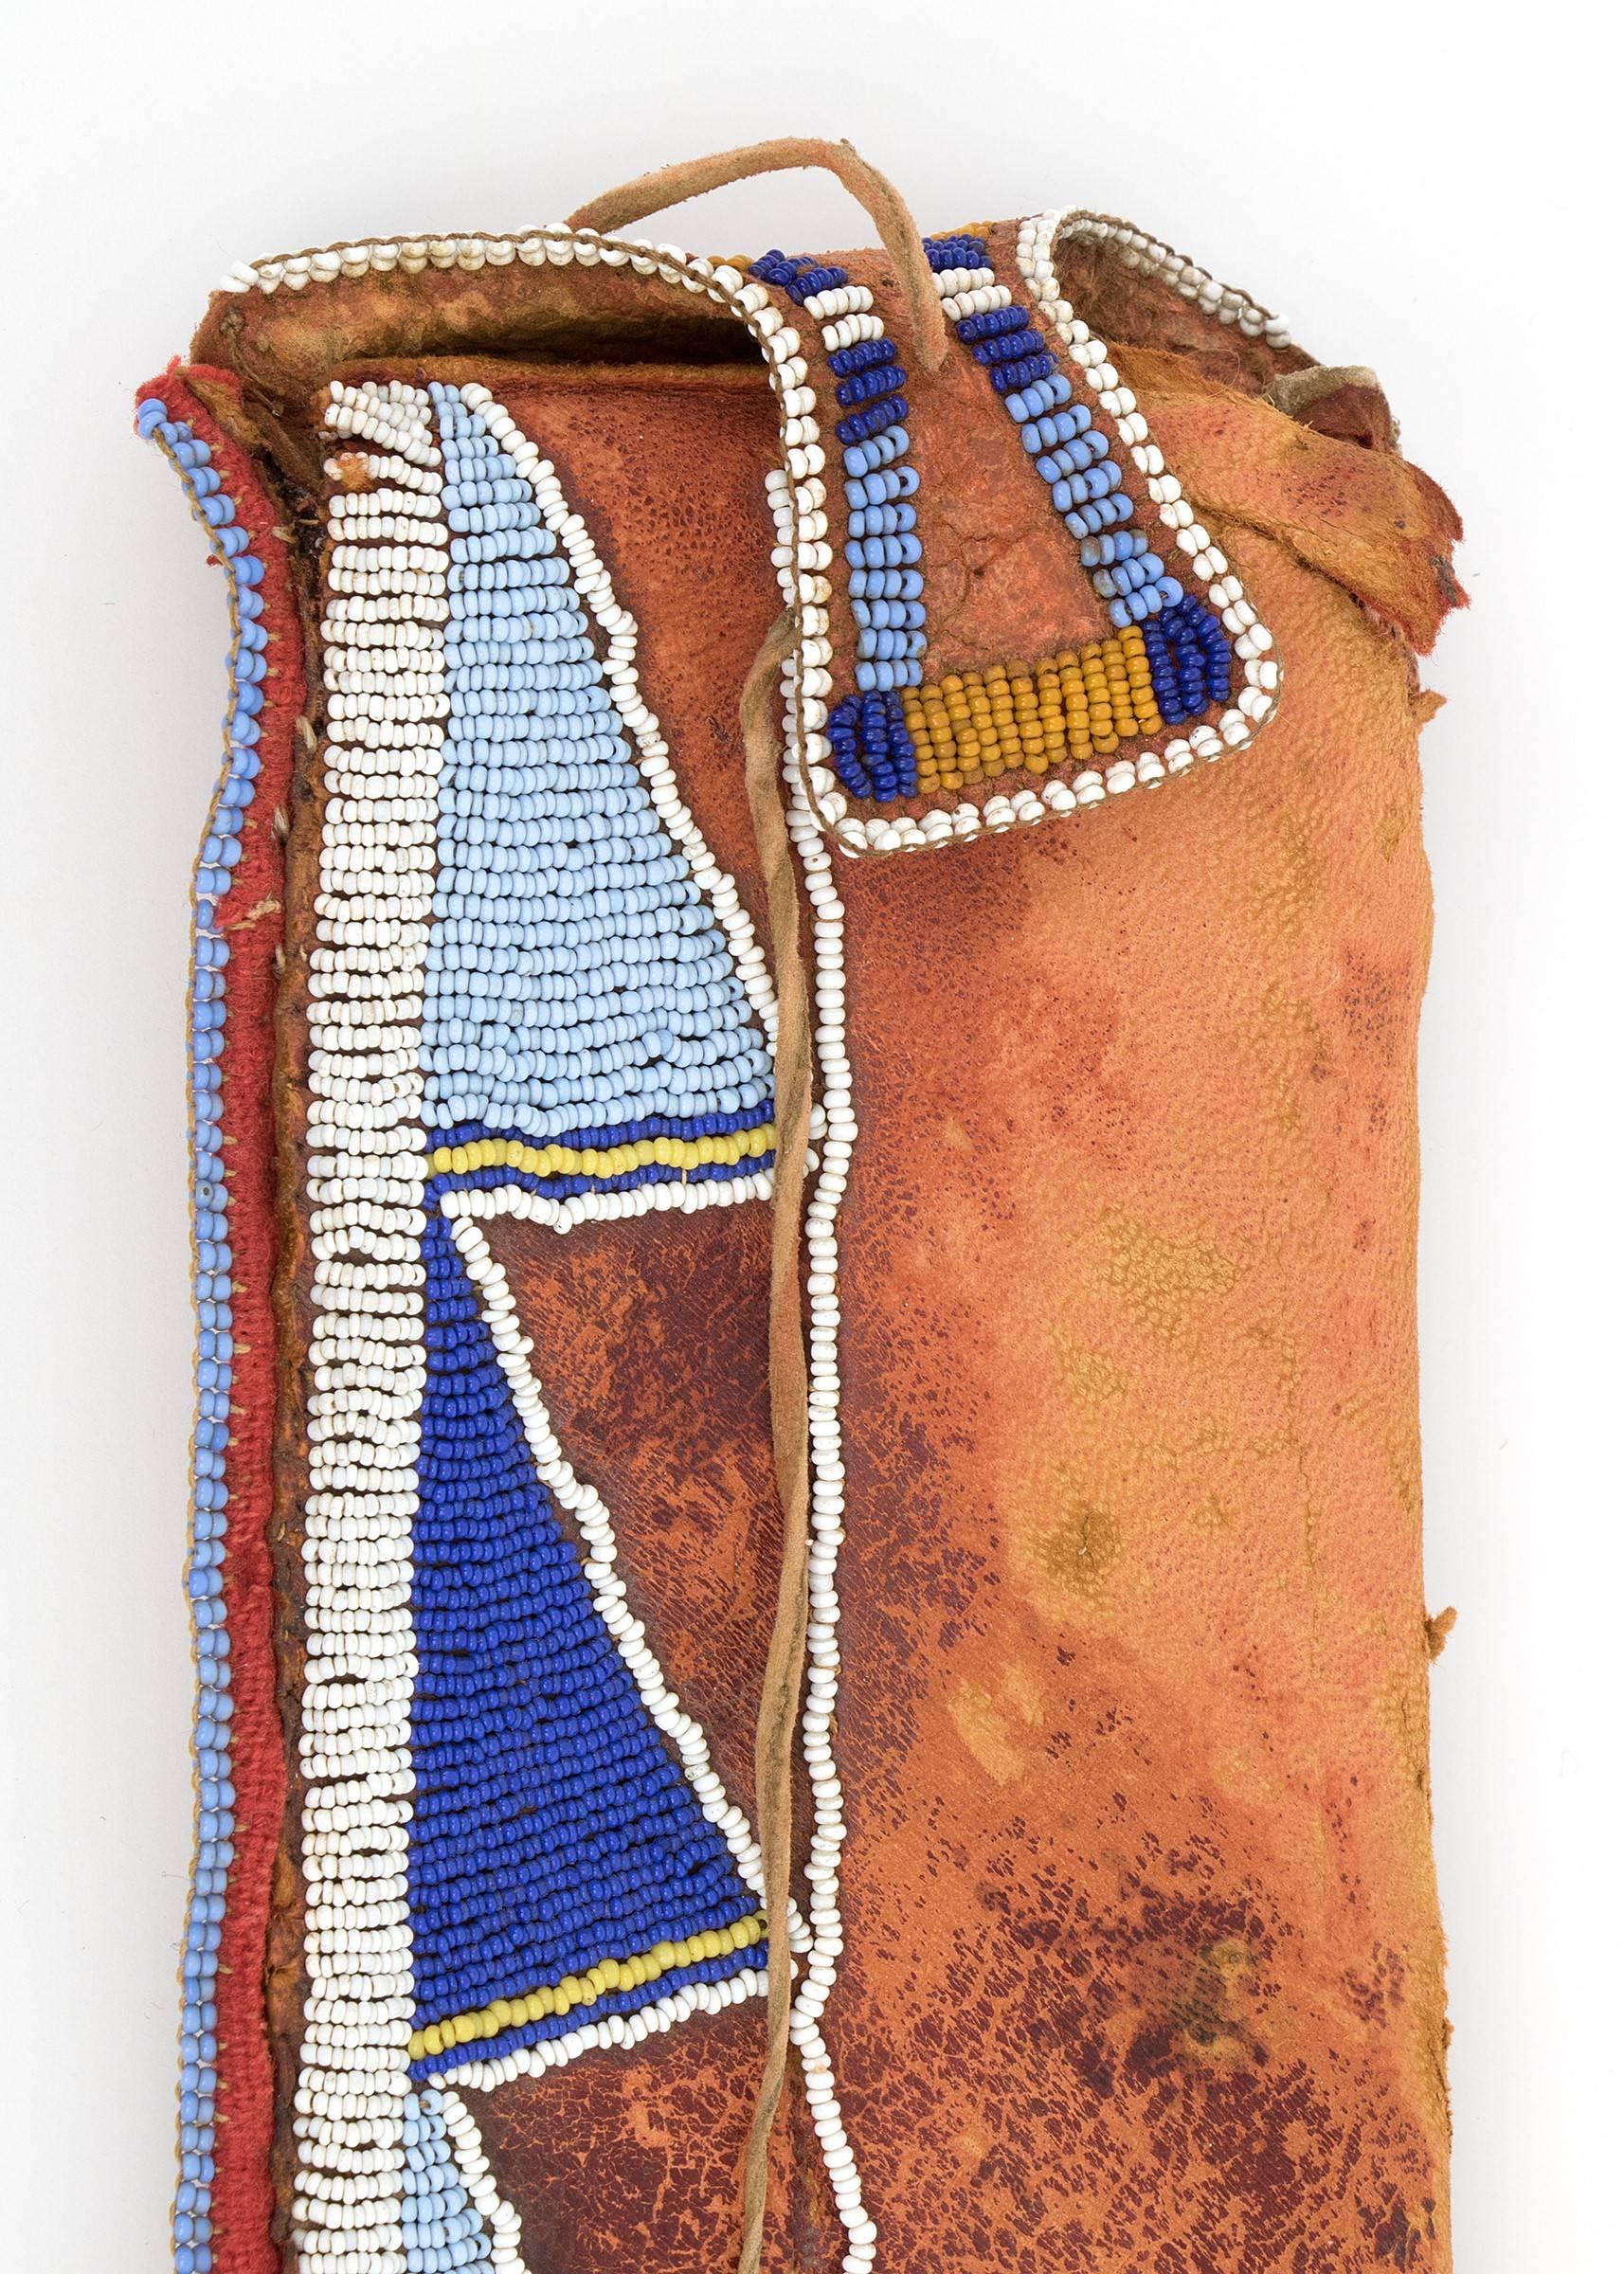 A Classic Period (Pre-Reservation era) knife sheath created circa 1870 by a Crow (Plains Indian/Native American) artist.  Constructed of Native tanned hide and partially beaded with blue, white and yellow trade beads.  There is red trade cloth along